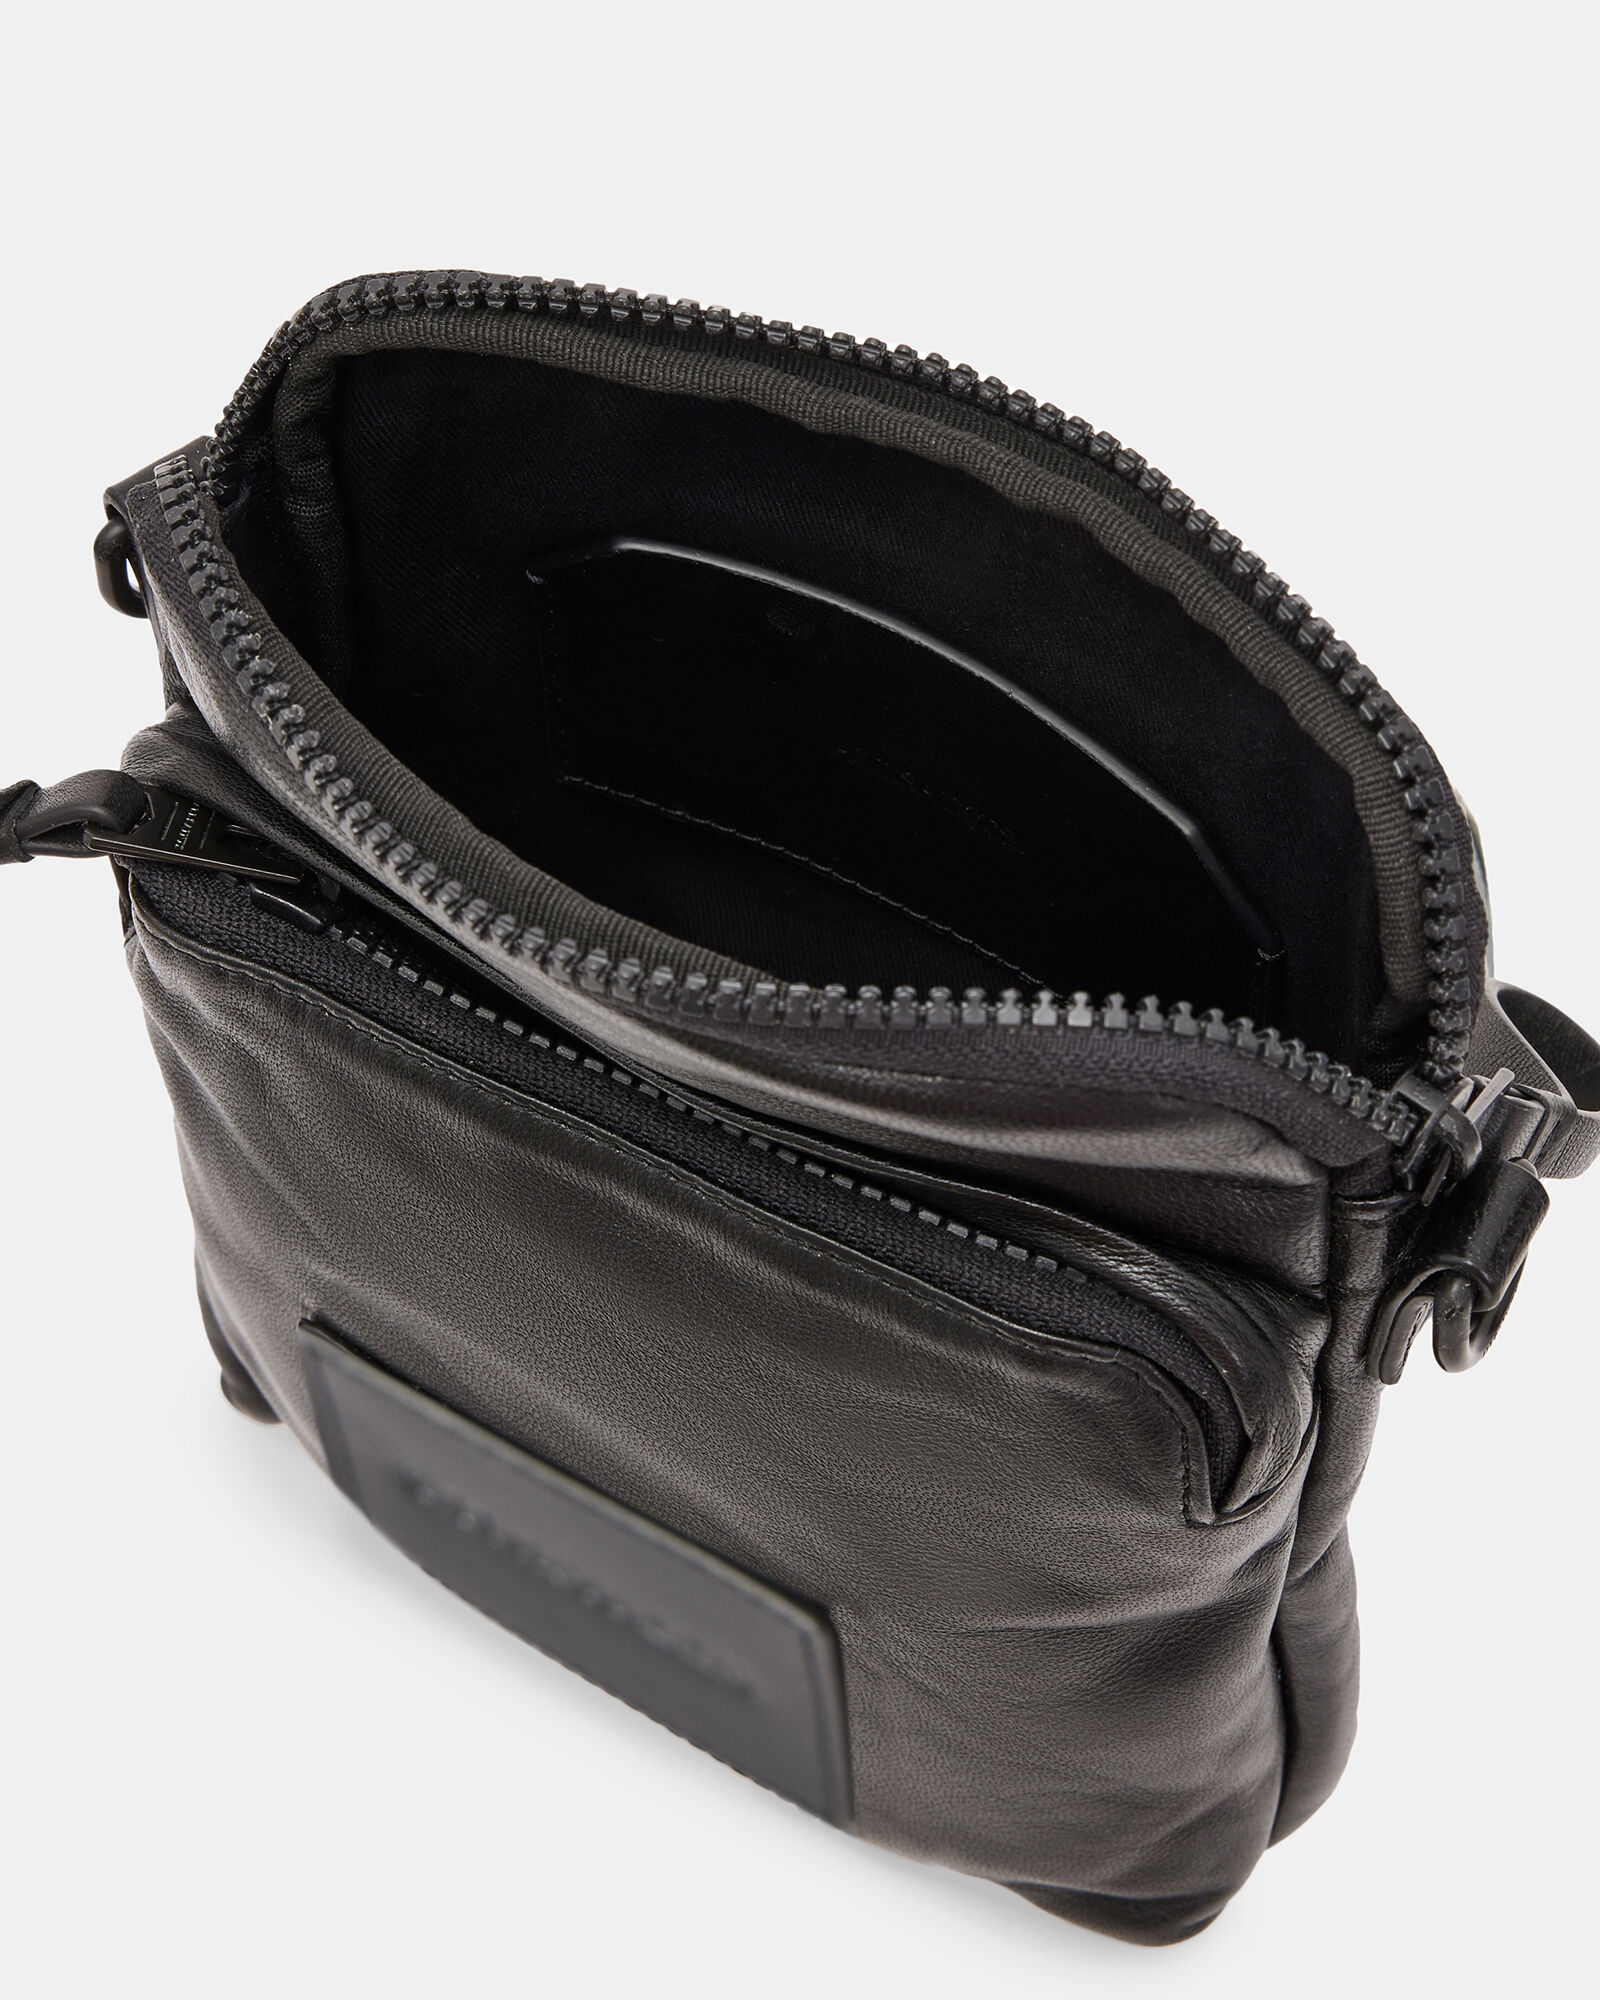 Falcon Leather Pouch Bag